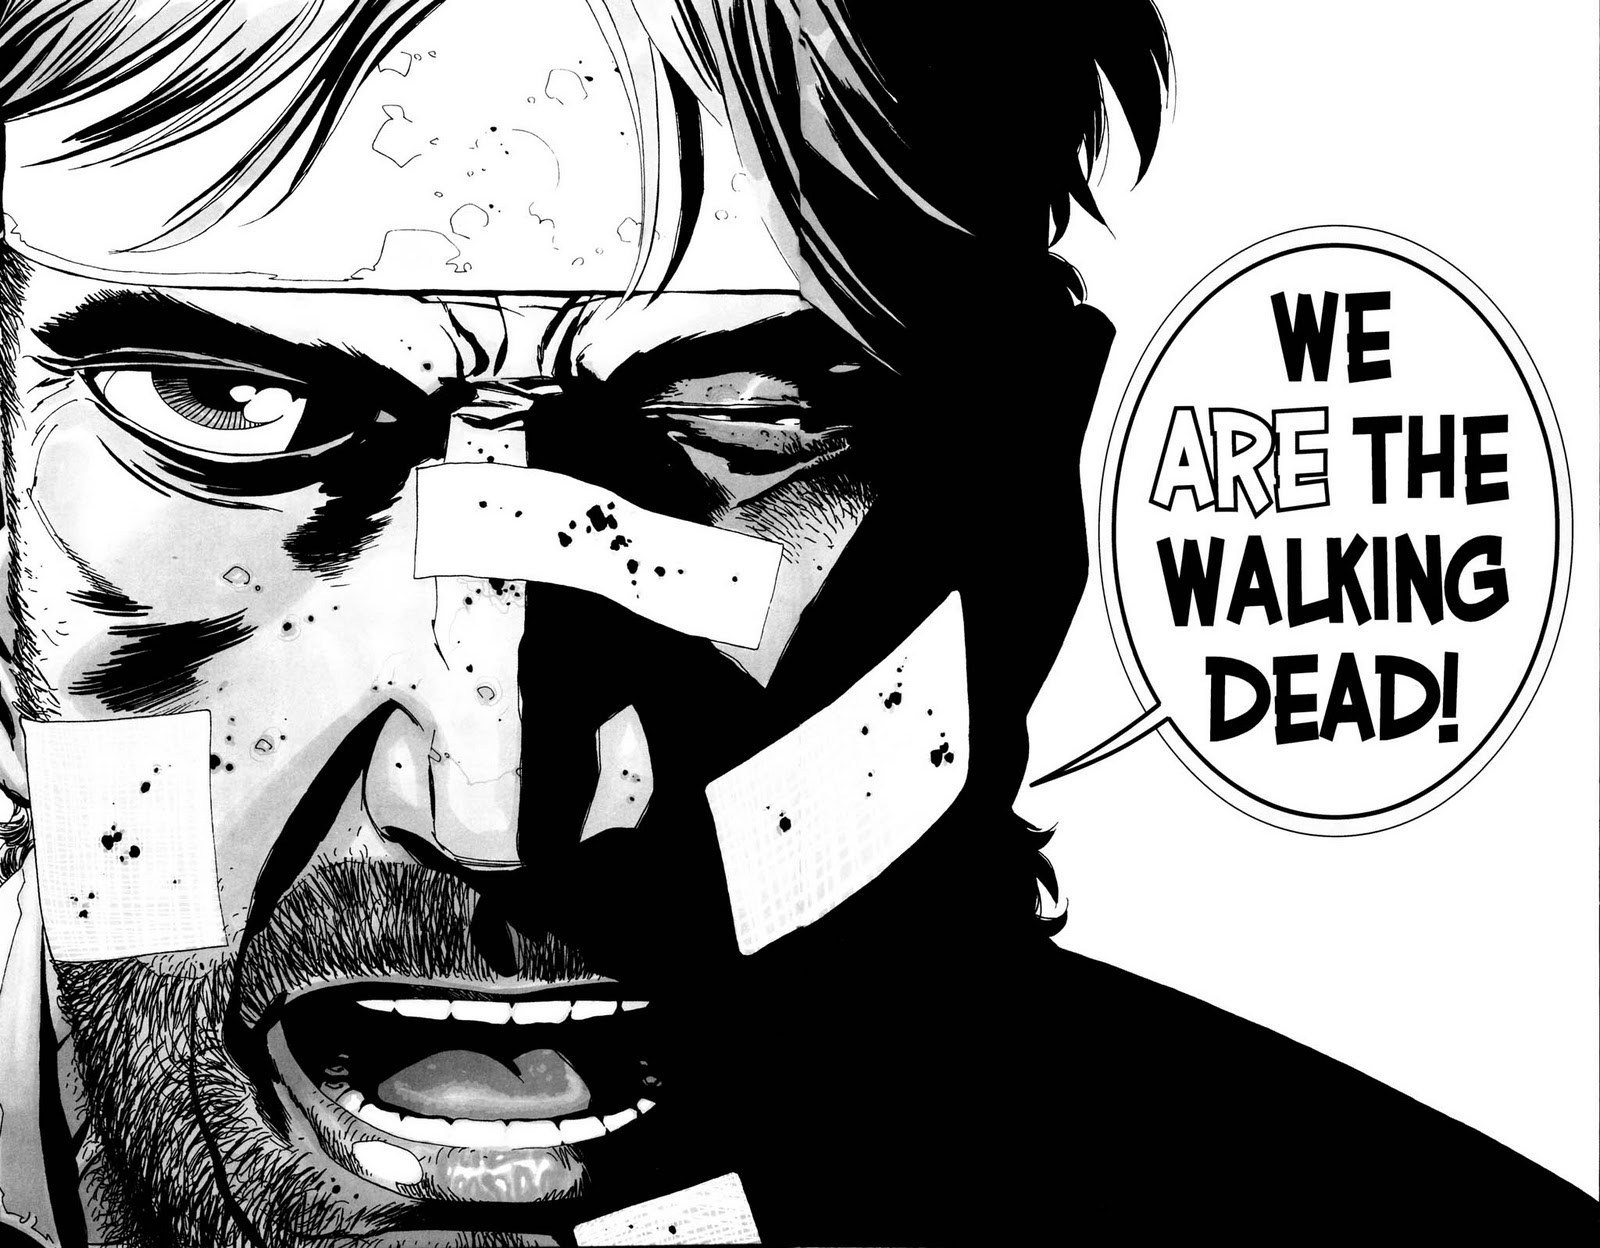 THe Walking Dead Volume 4 Graphic Novel Review